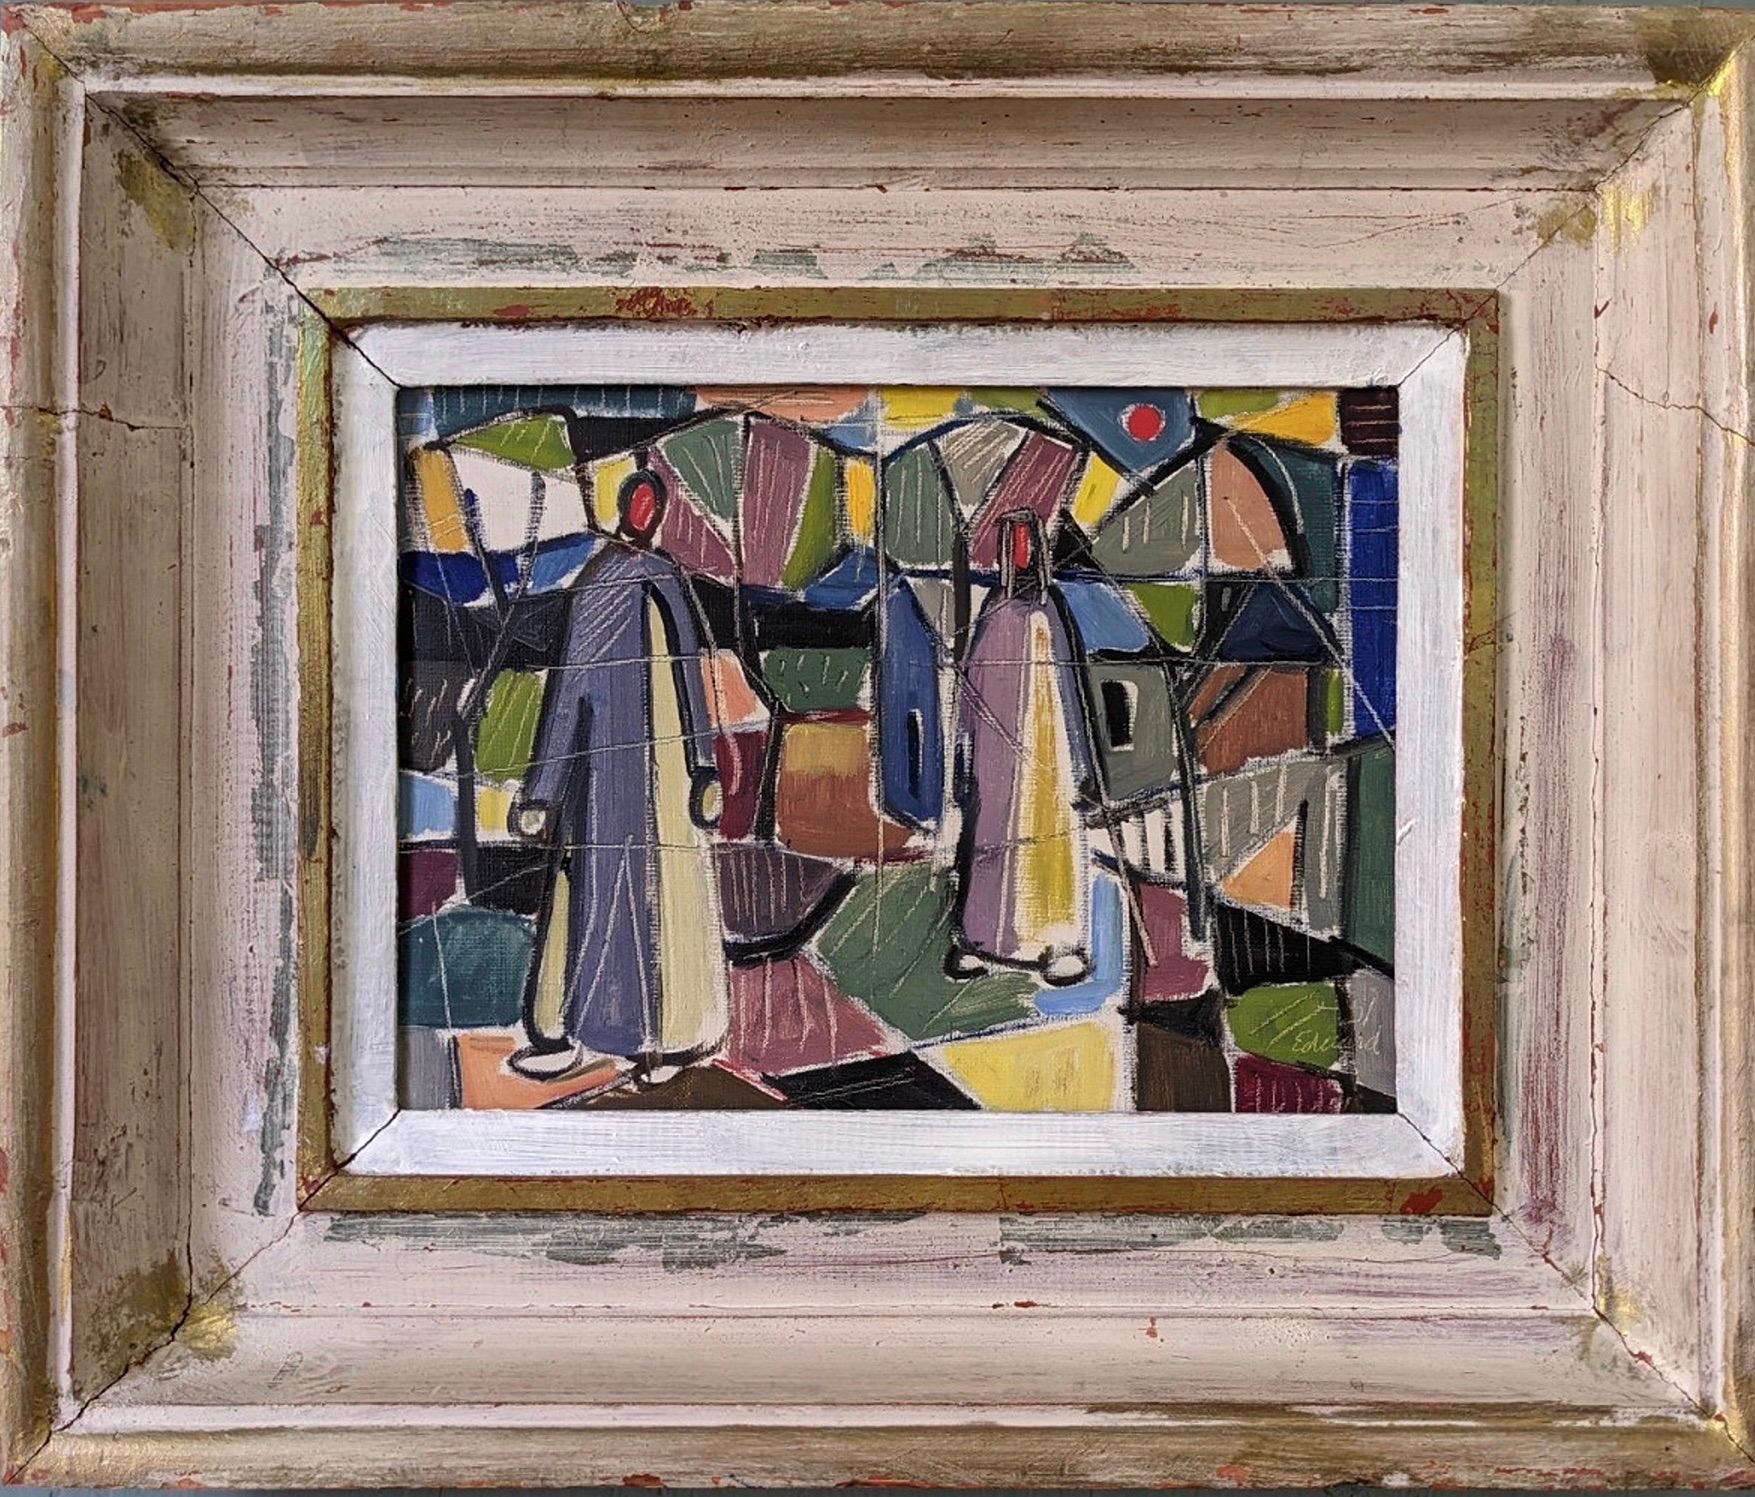 Unknown Abstract Painting - Vintage Mid-Century Framed Geometric Abstract Oil Painting - Figures in Colour